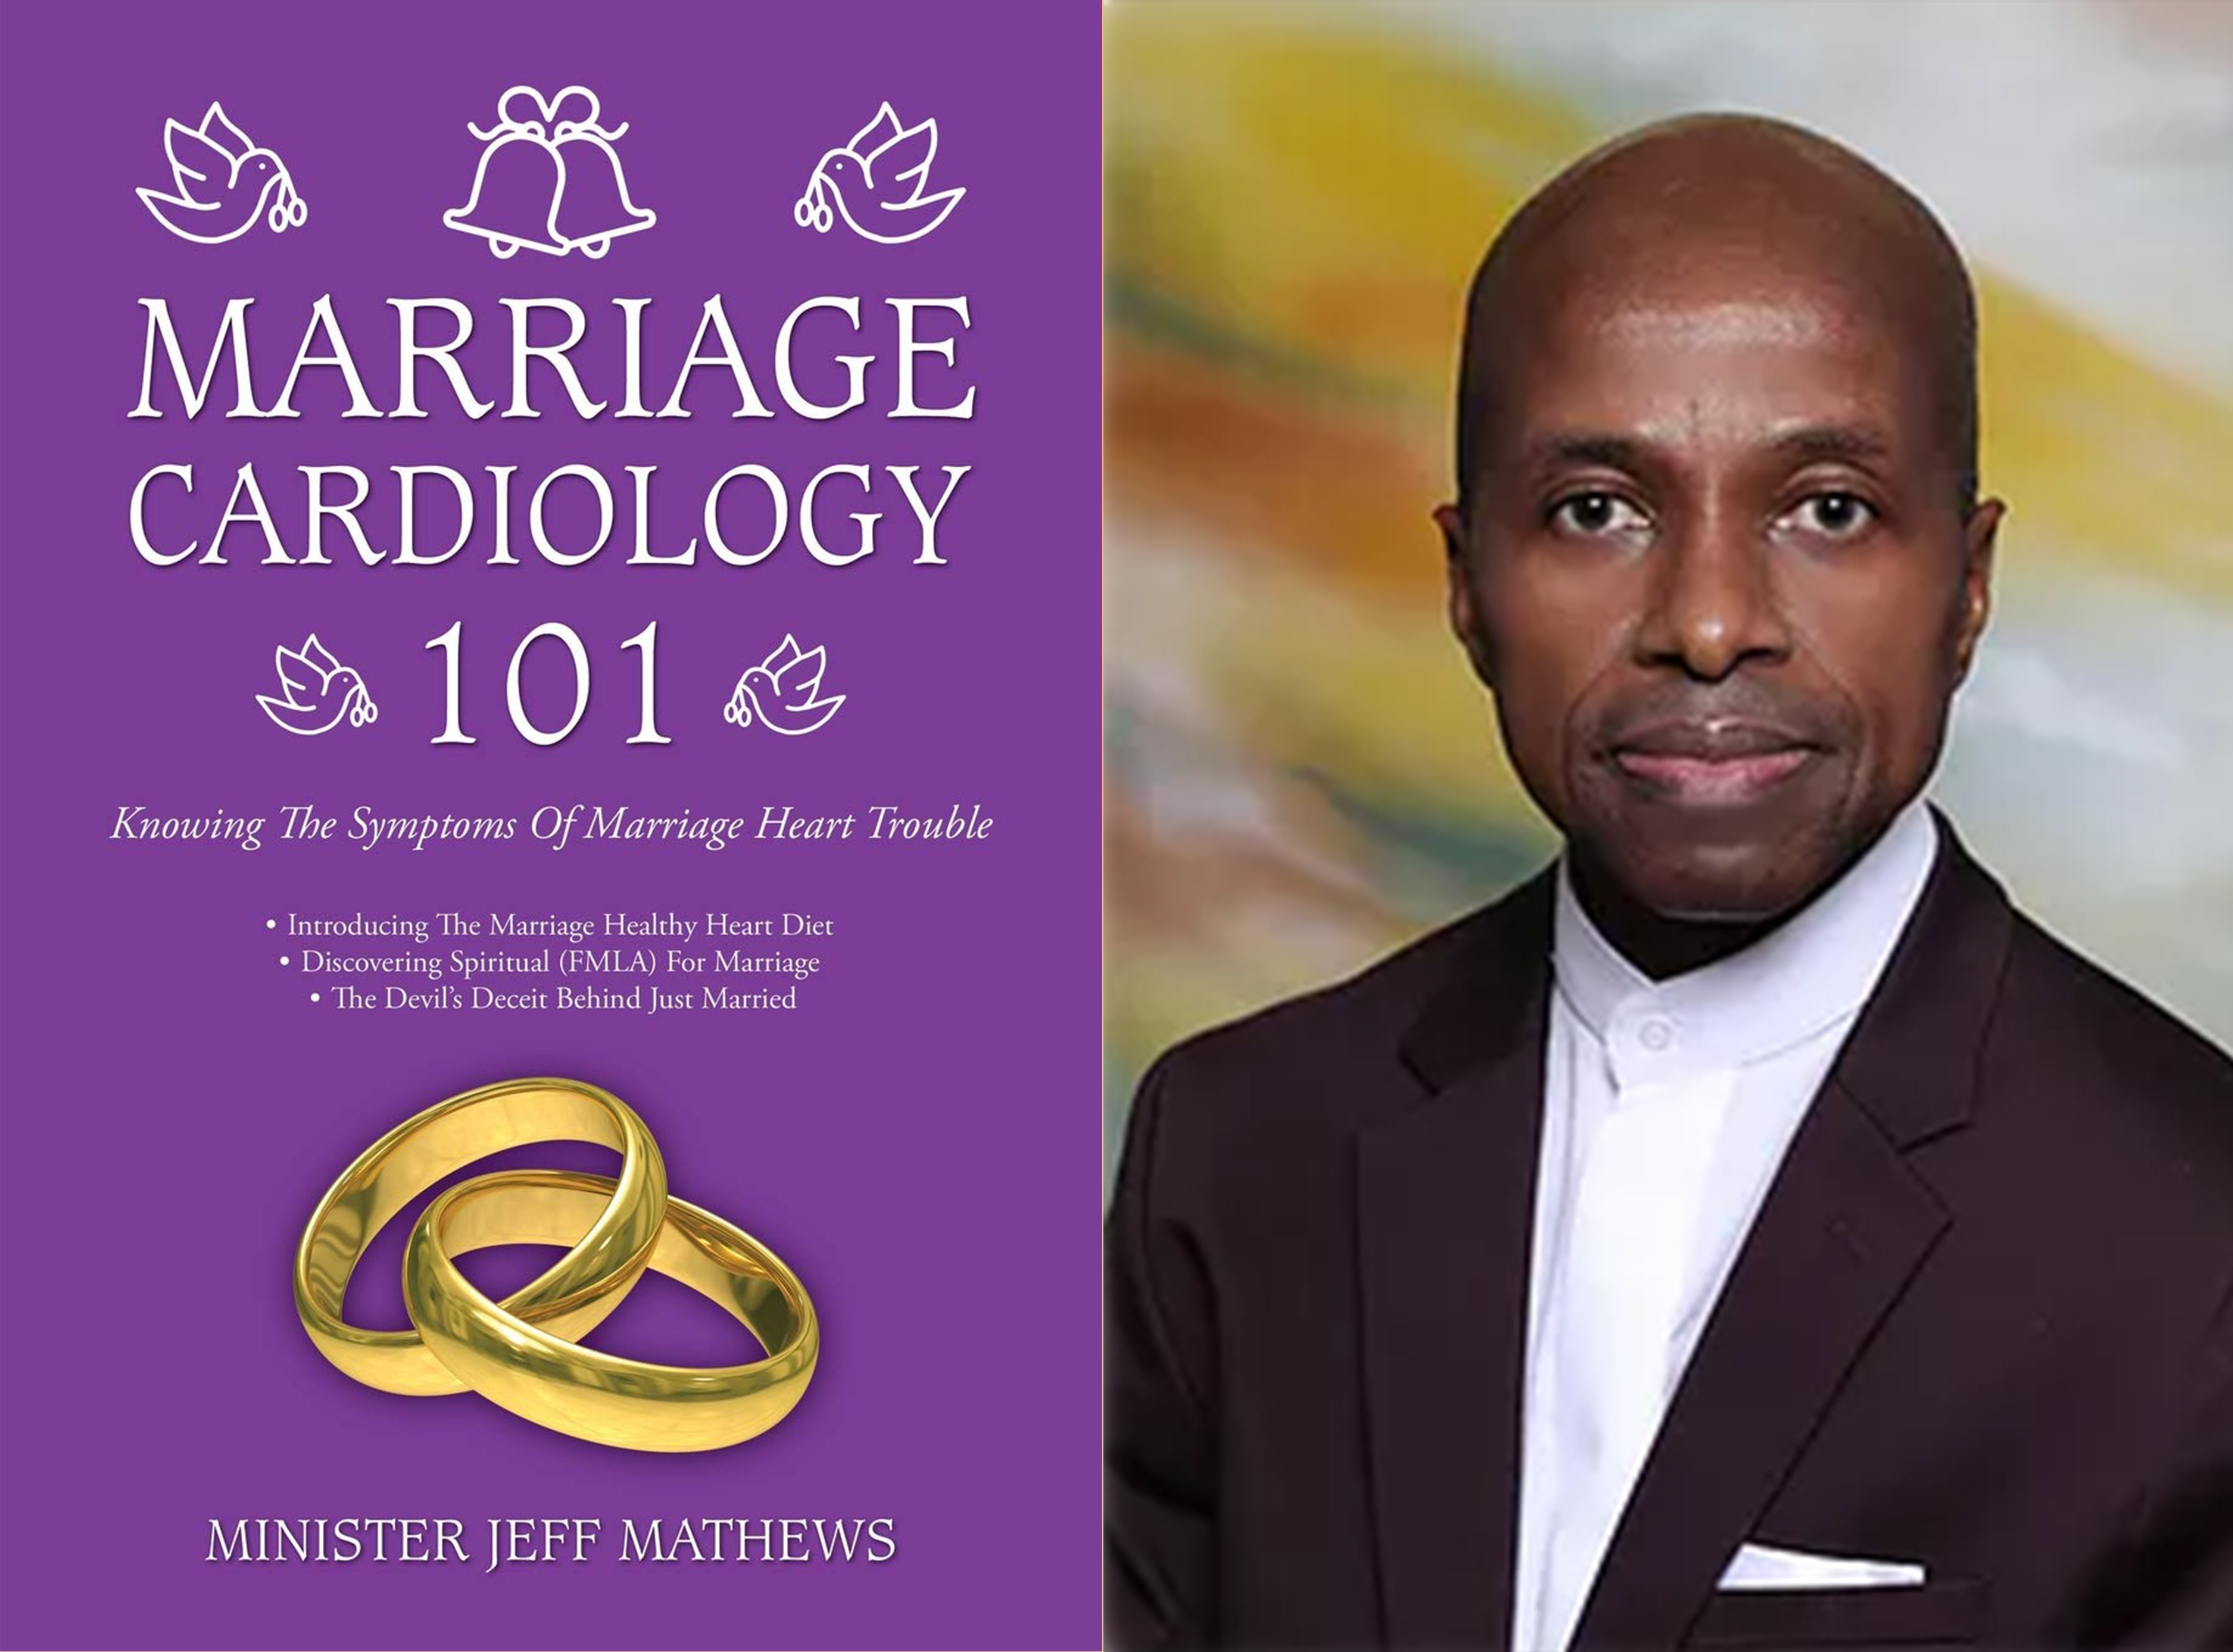 "Marriage Cardiology 101: Knowing the Symptoms of Marriage Heart Trouble" Is Available Now On Amazon